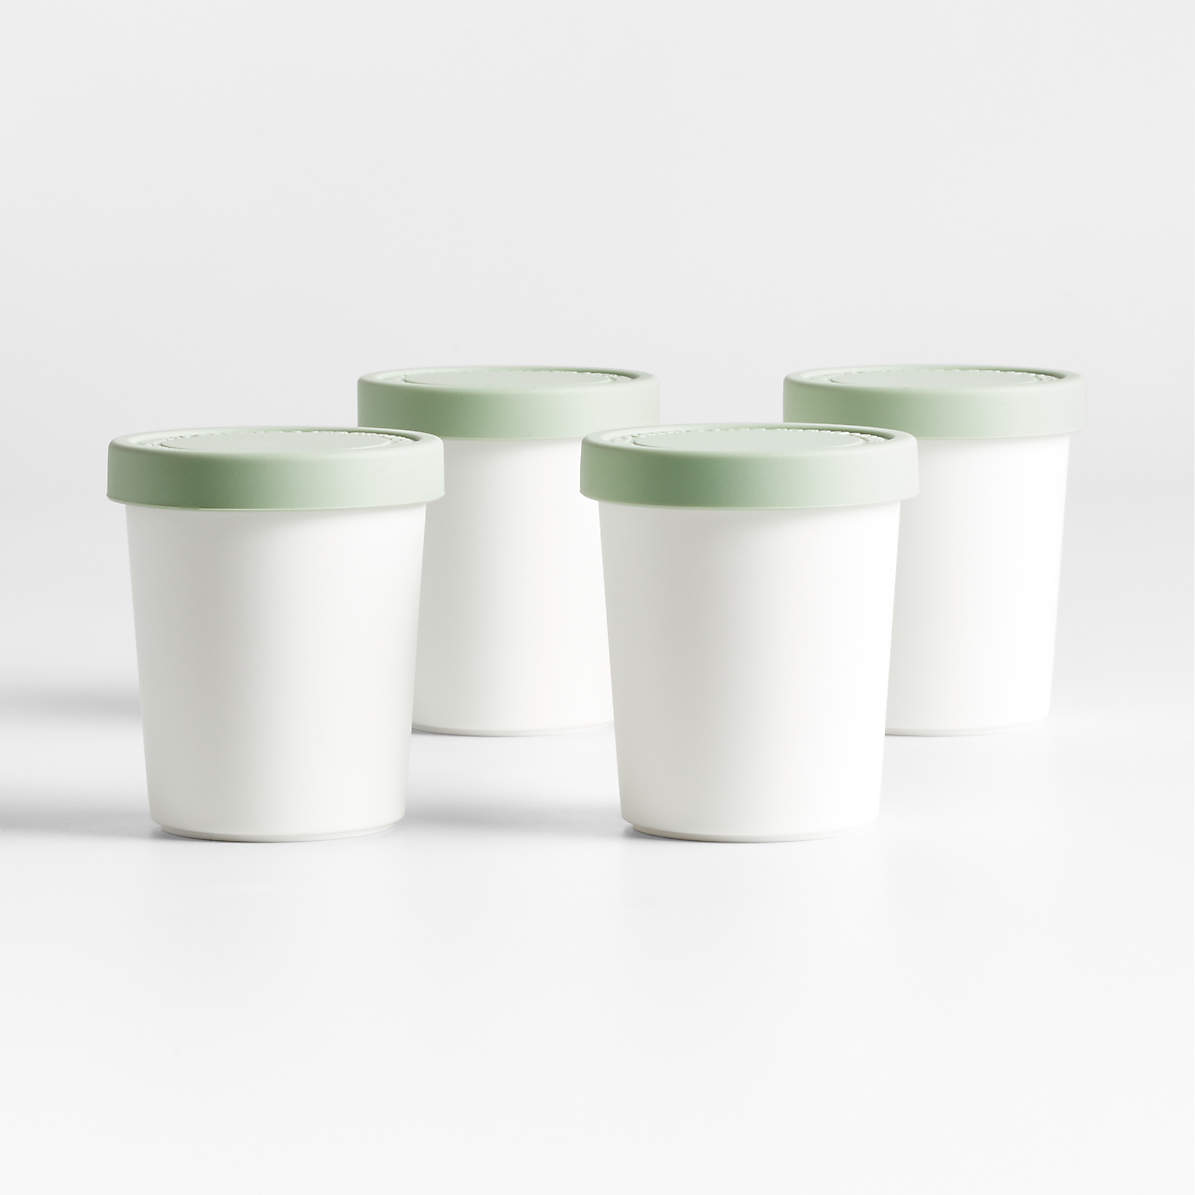 Premium Ice Cream Containers (2 Pack - 1.5 Quart Each) Reusable Freezer  Storage Tubs with Lids for Ice Cream, Sorbet and Gelato!